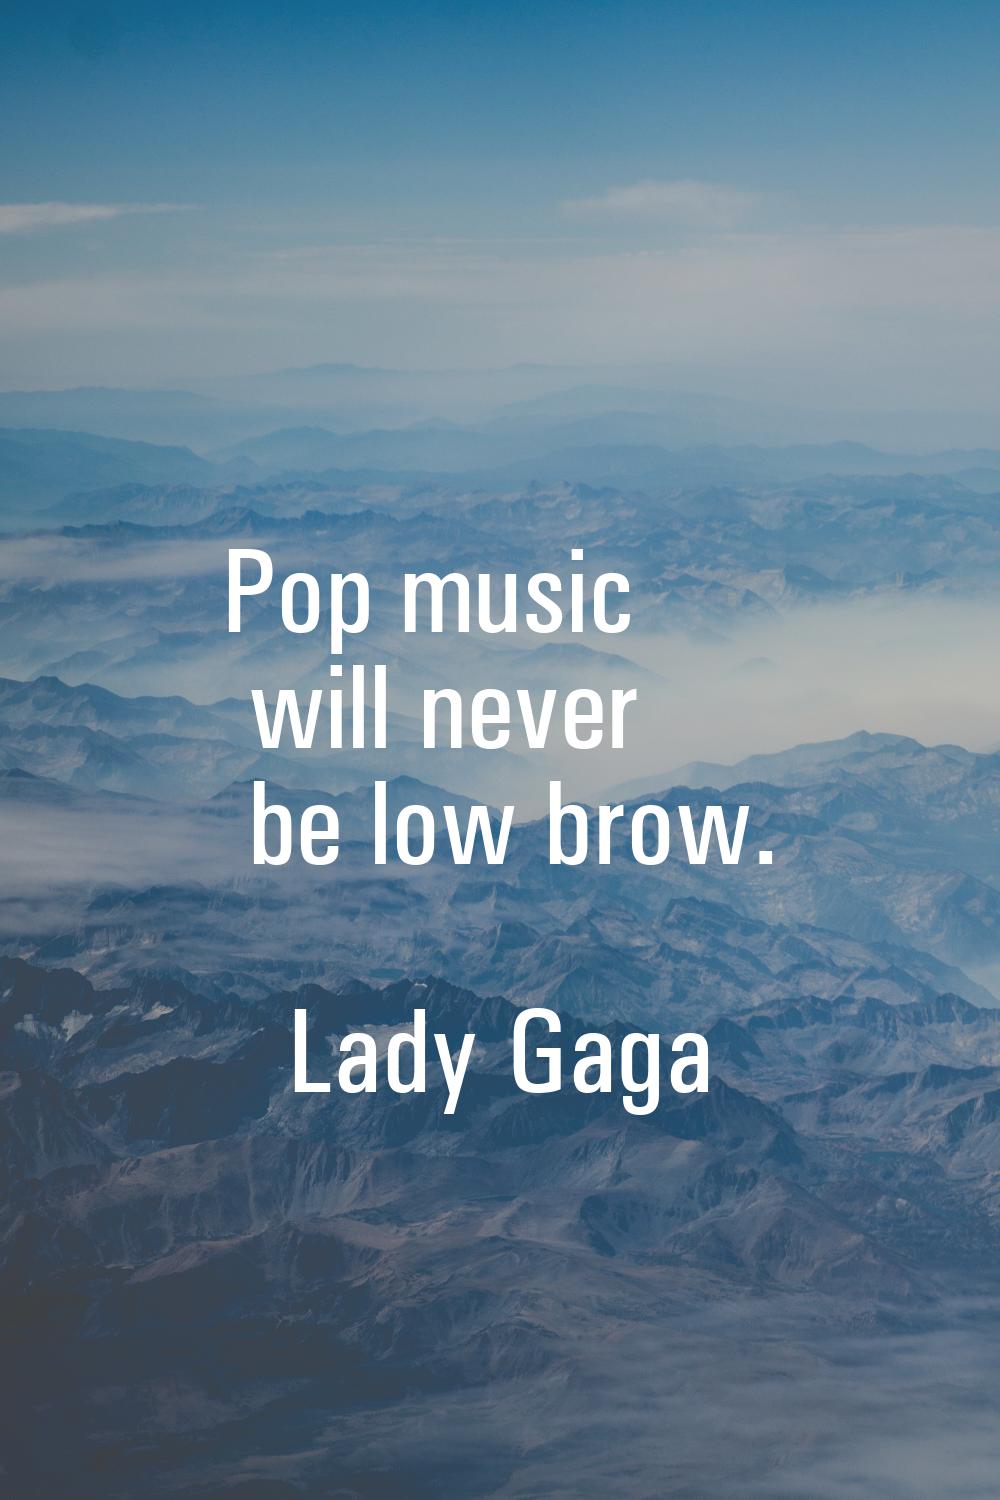 Pop music will never be low brow.